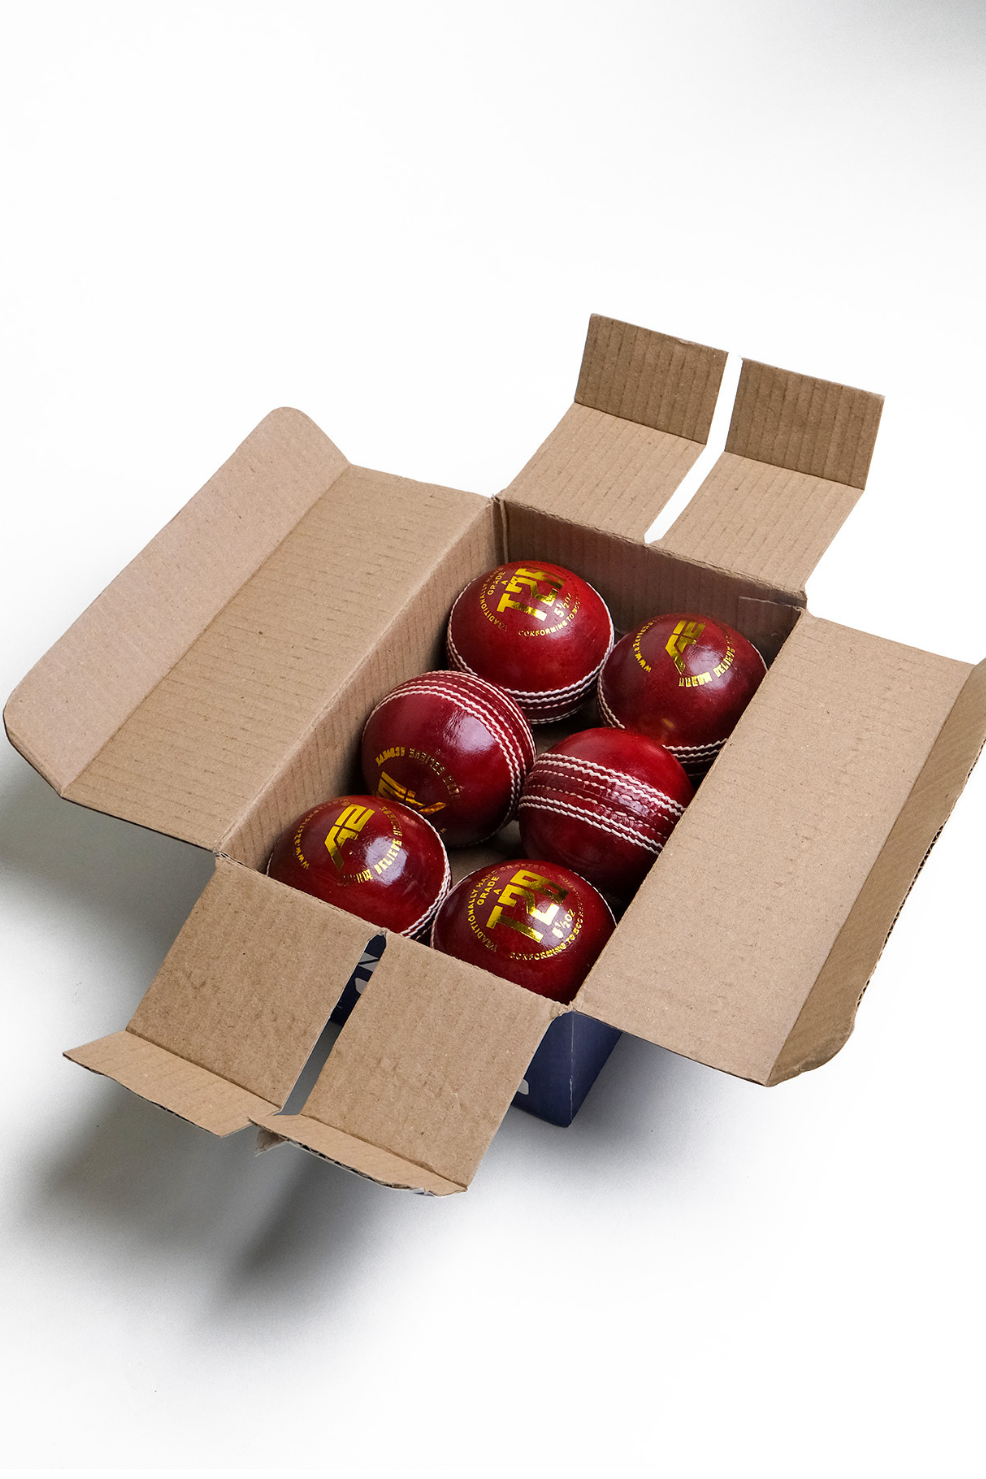 4 Piece Leather Cricket Ball - T20 Red (Box of 6 balls)